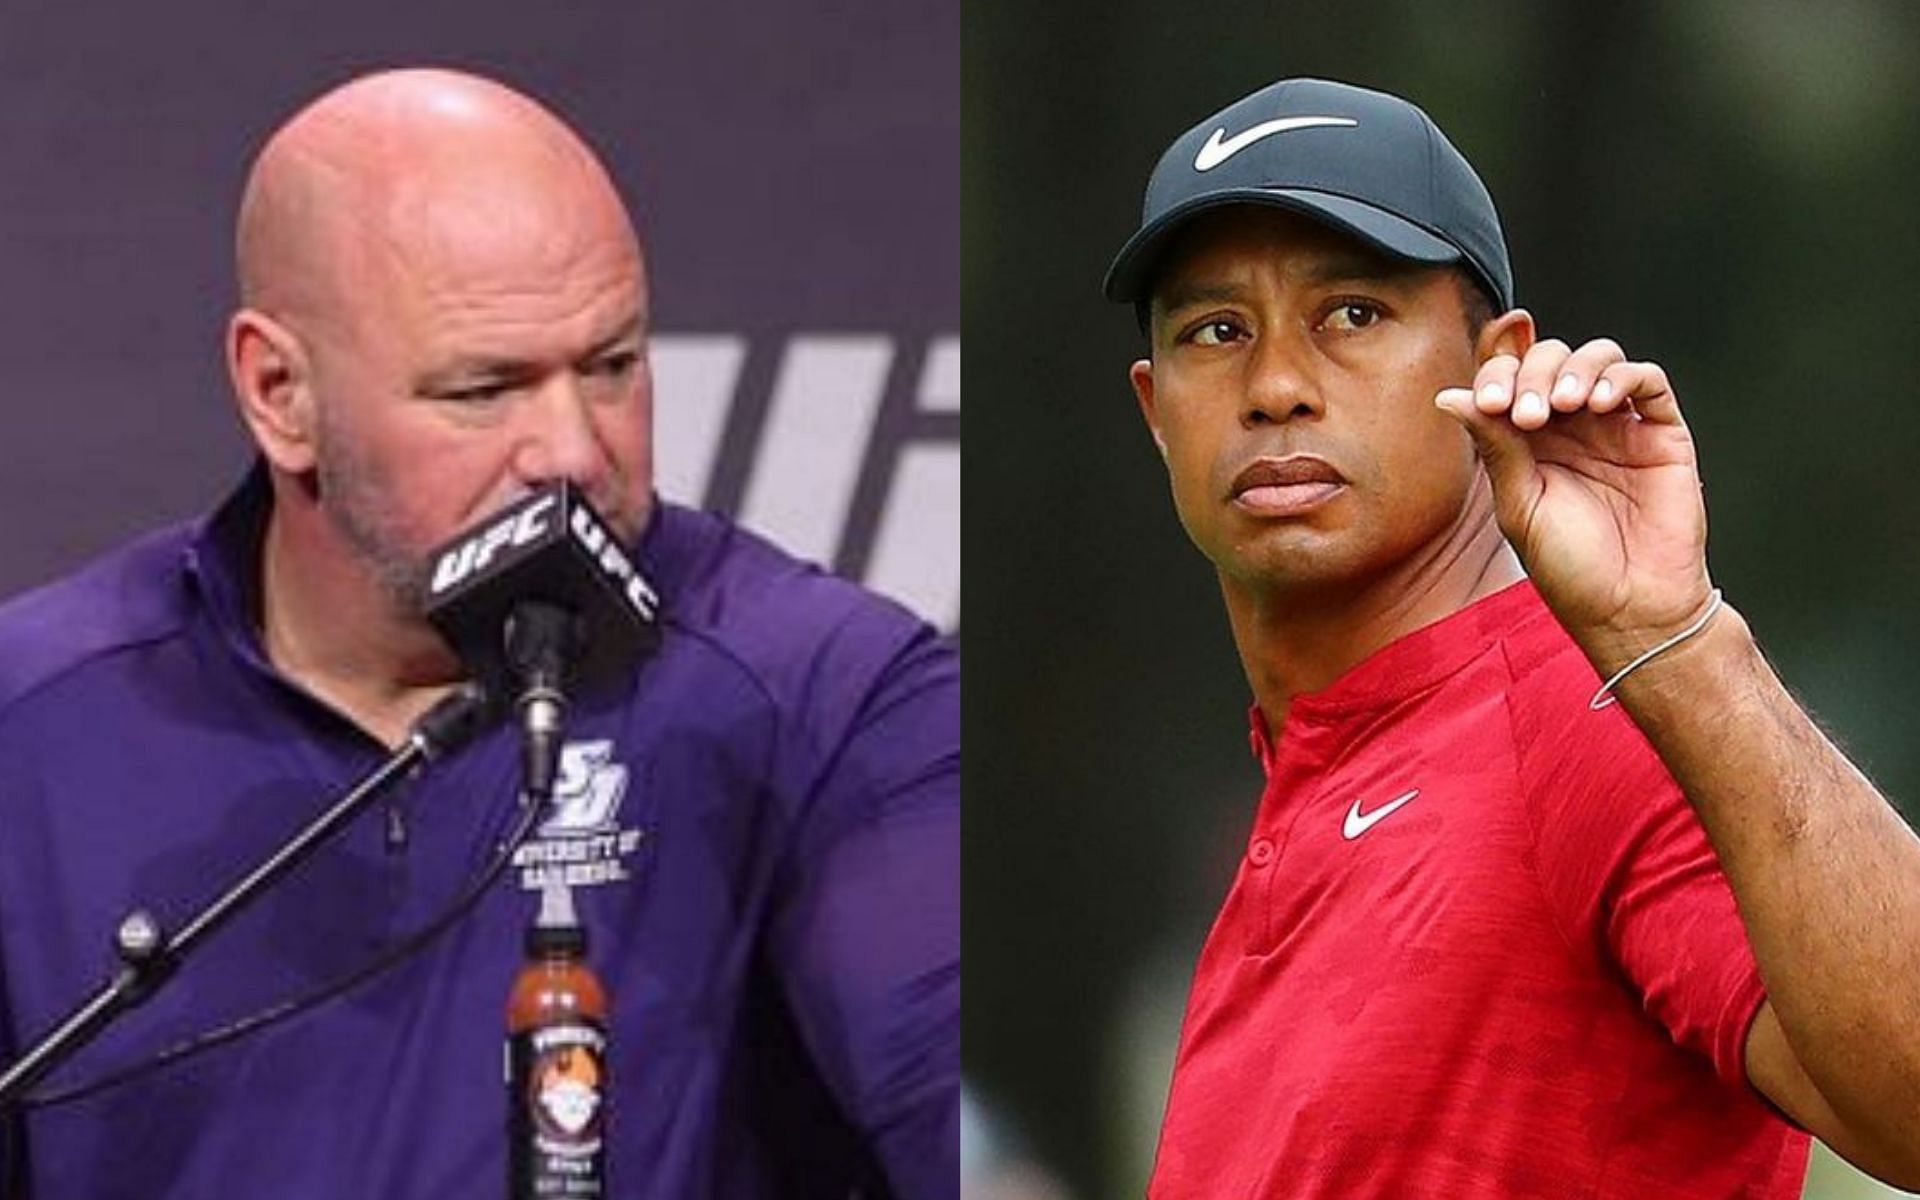 Dana White (left) and Tiger Woods (right) [Image Courtesy: @tigerwoods on Instagram]